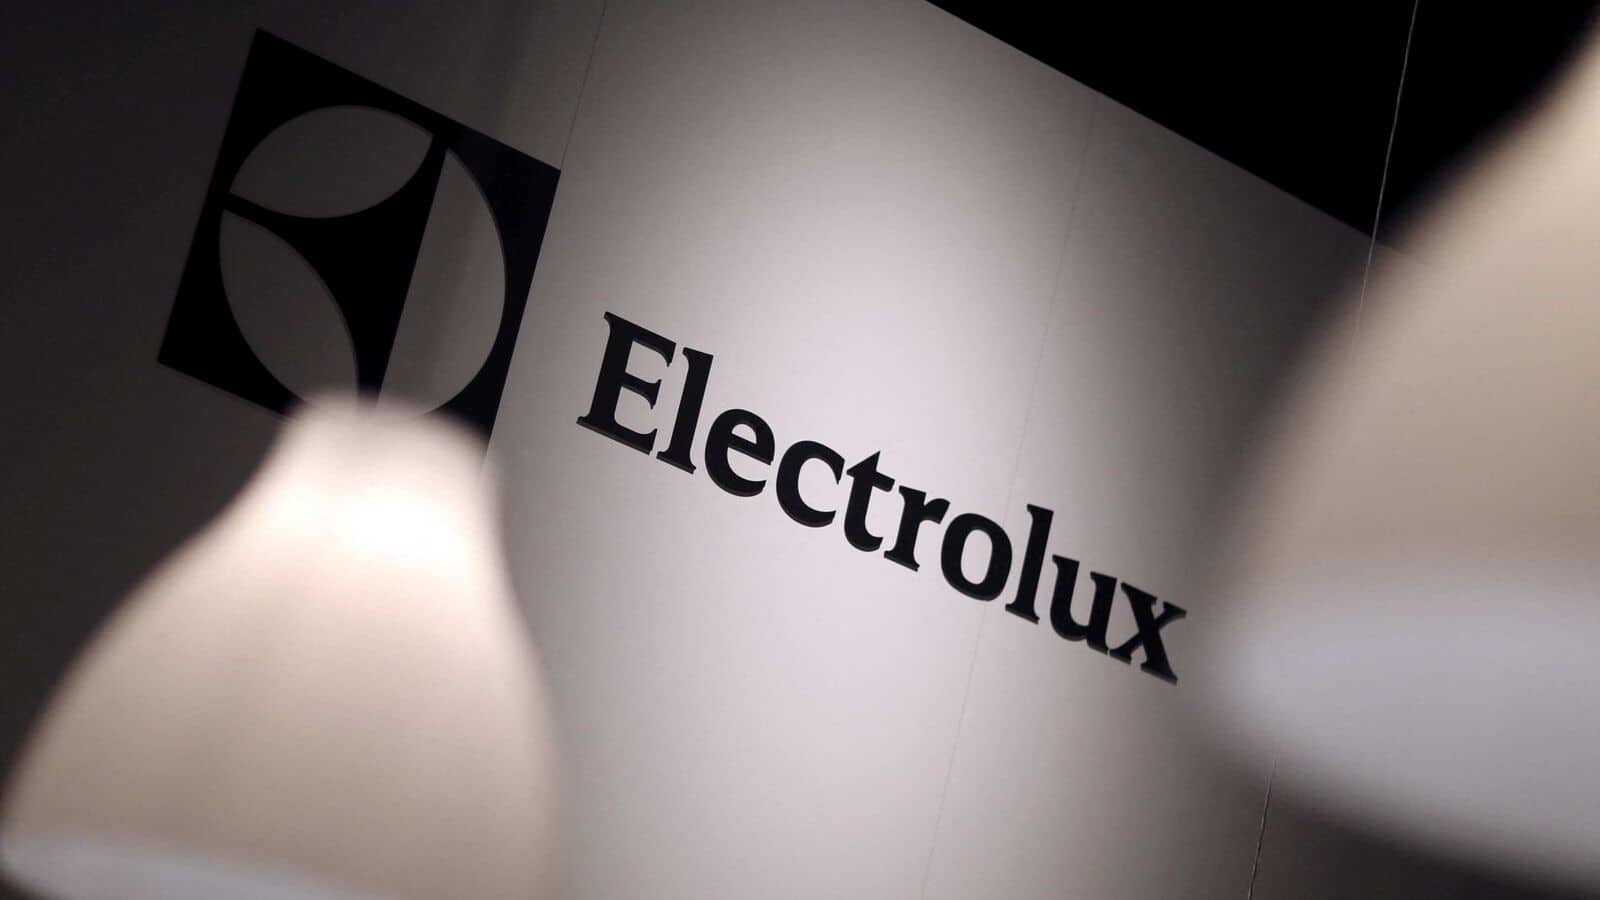 Home appliances maker Electrolux to cut up to 000 jobs after heavy losses